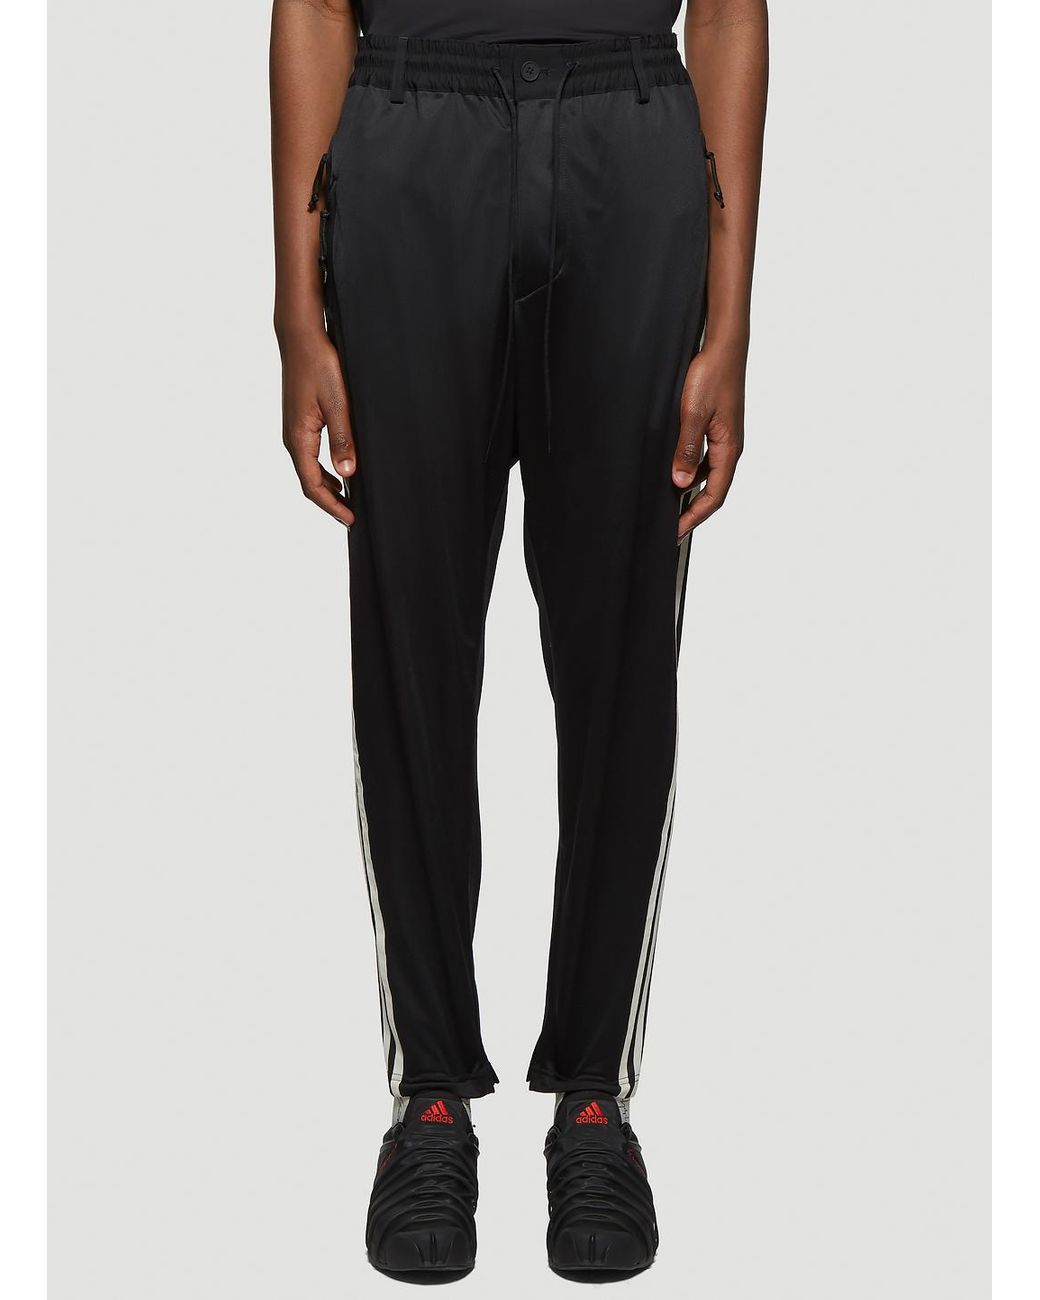 Y-3 Synthetic M3 Stp Stirrup Track Pants In Black for Men - Lyst